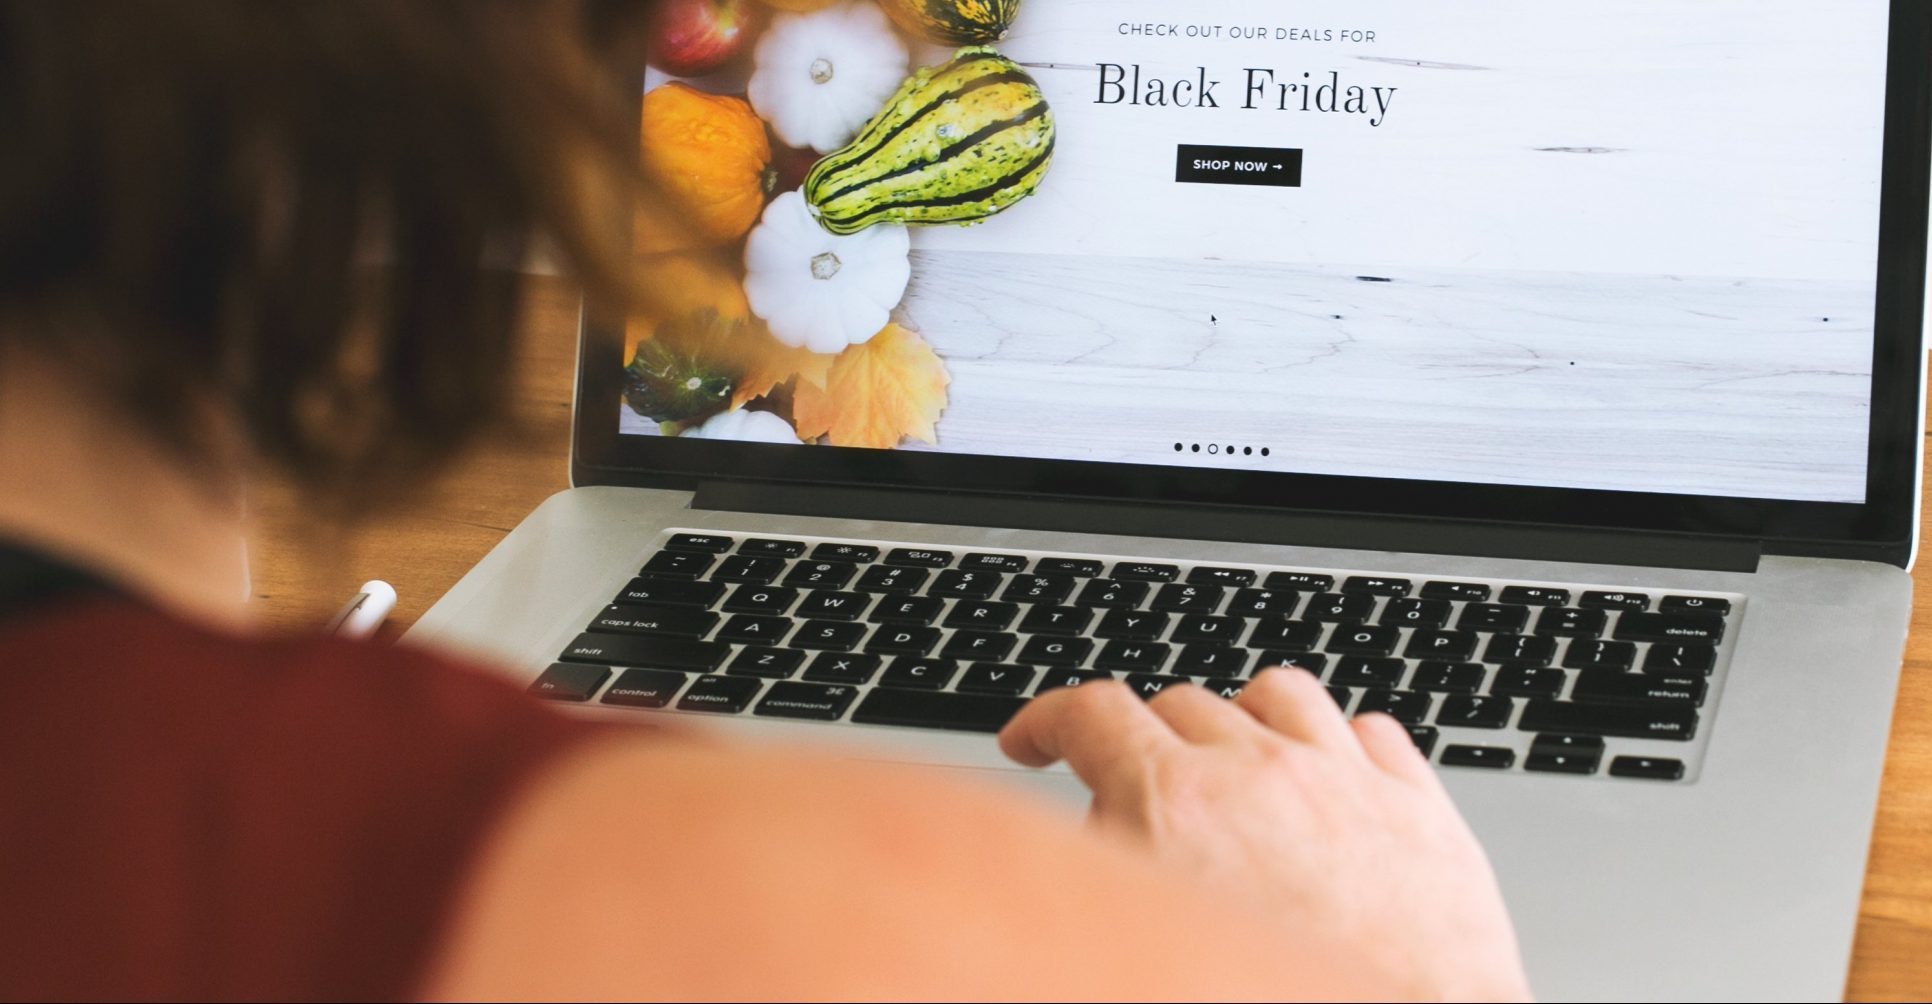 5 Tips to Get the Best Deals on Black Friday And Cyber Monday